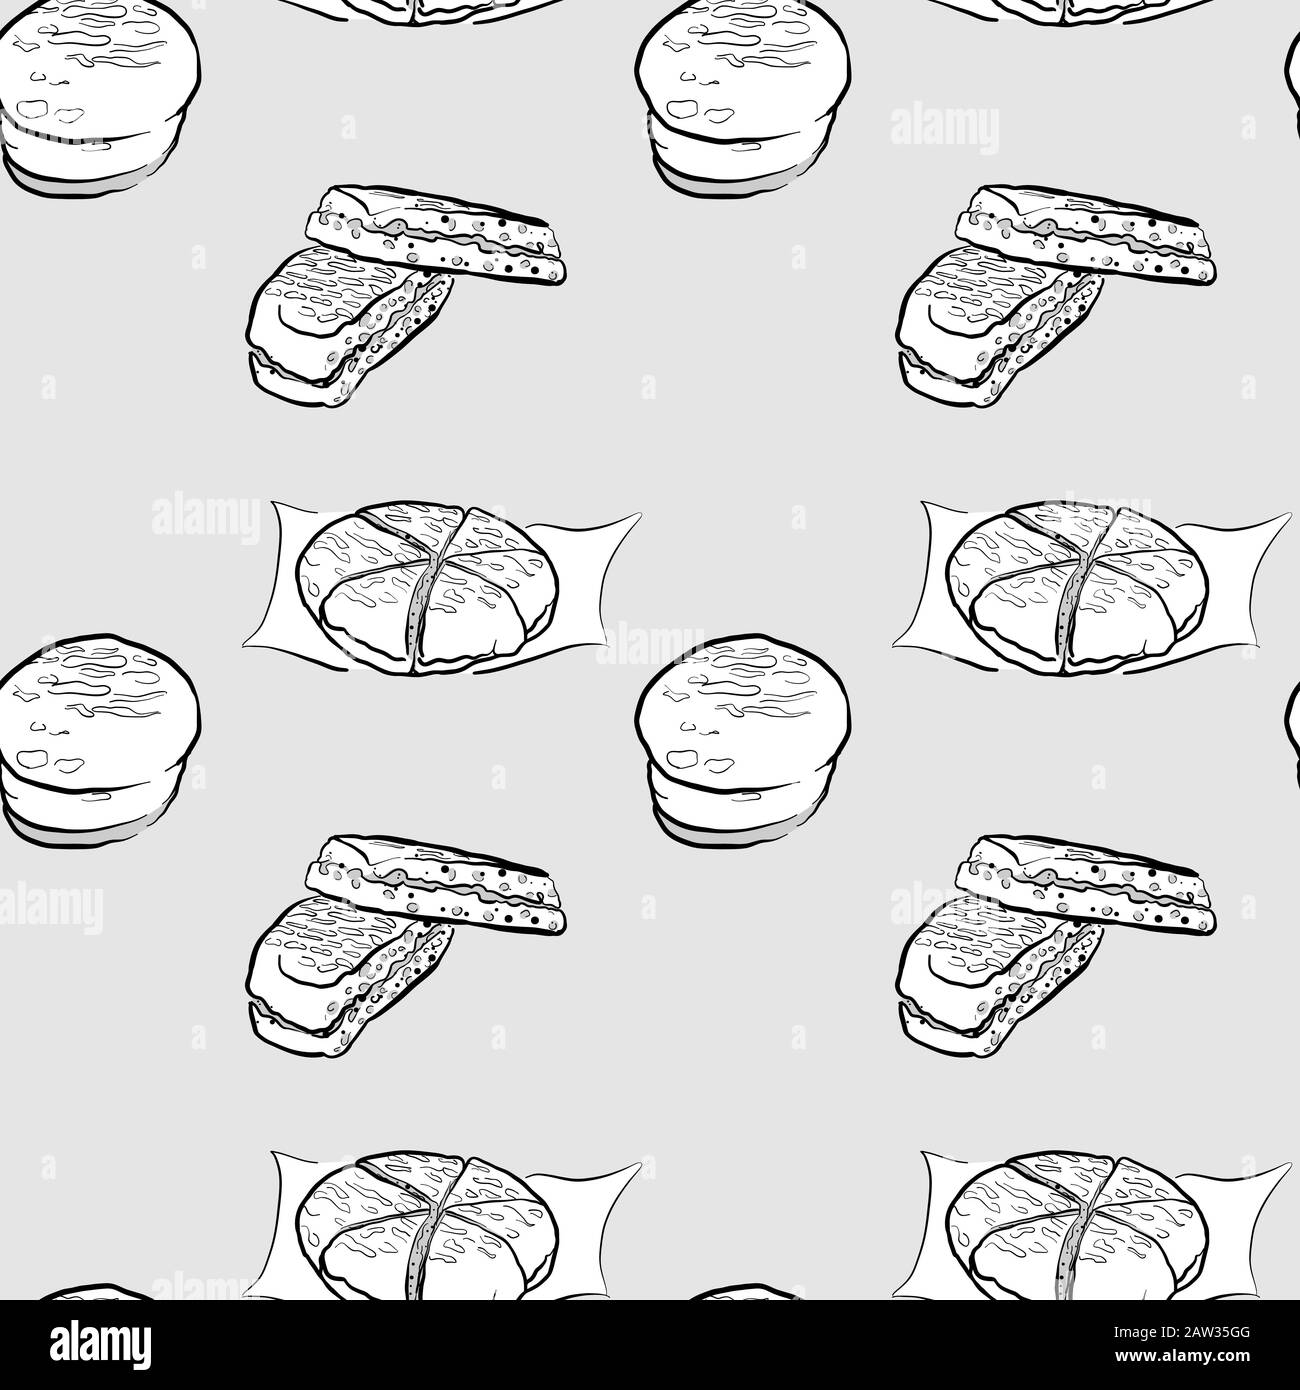 Bolo do caco seamless pattern greyscale drawing. Useable for wallpaper or any sized decoration. Handdrawn Vector Illustration Stock Vector